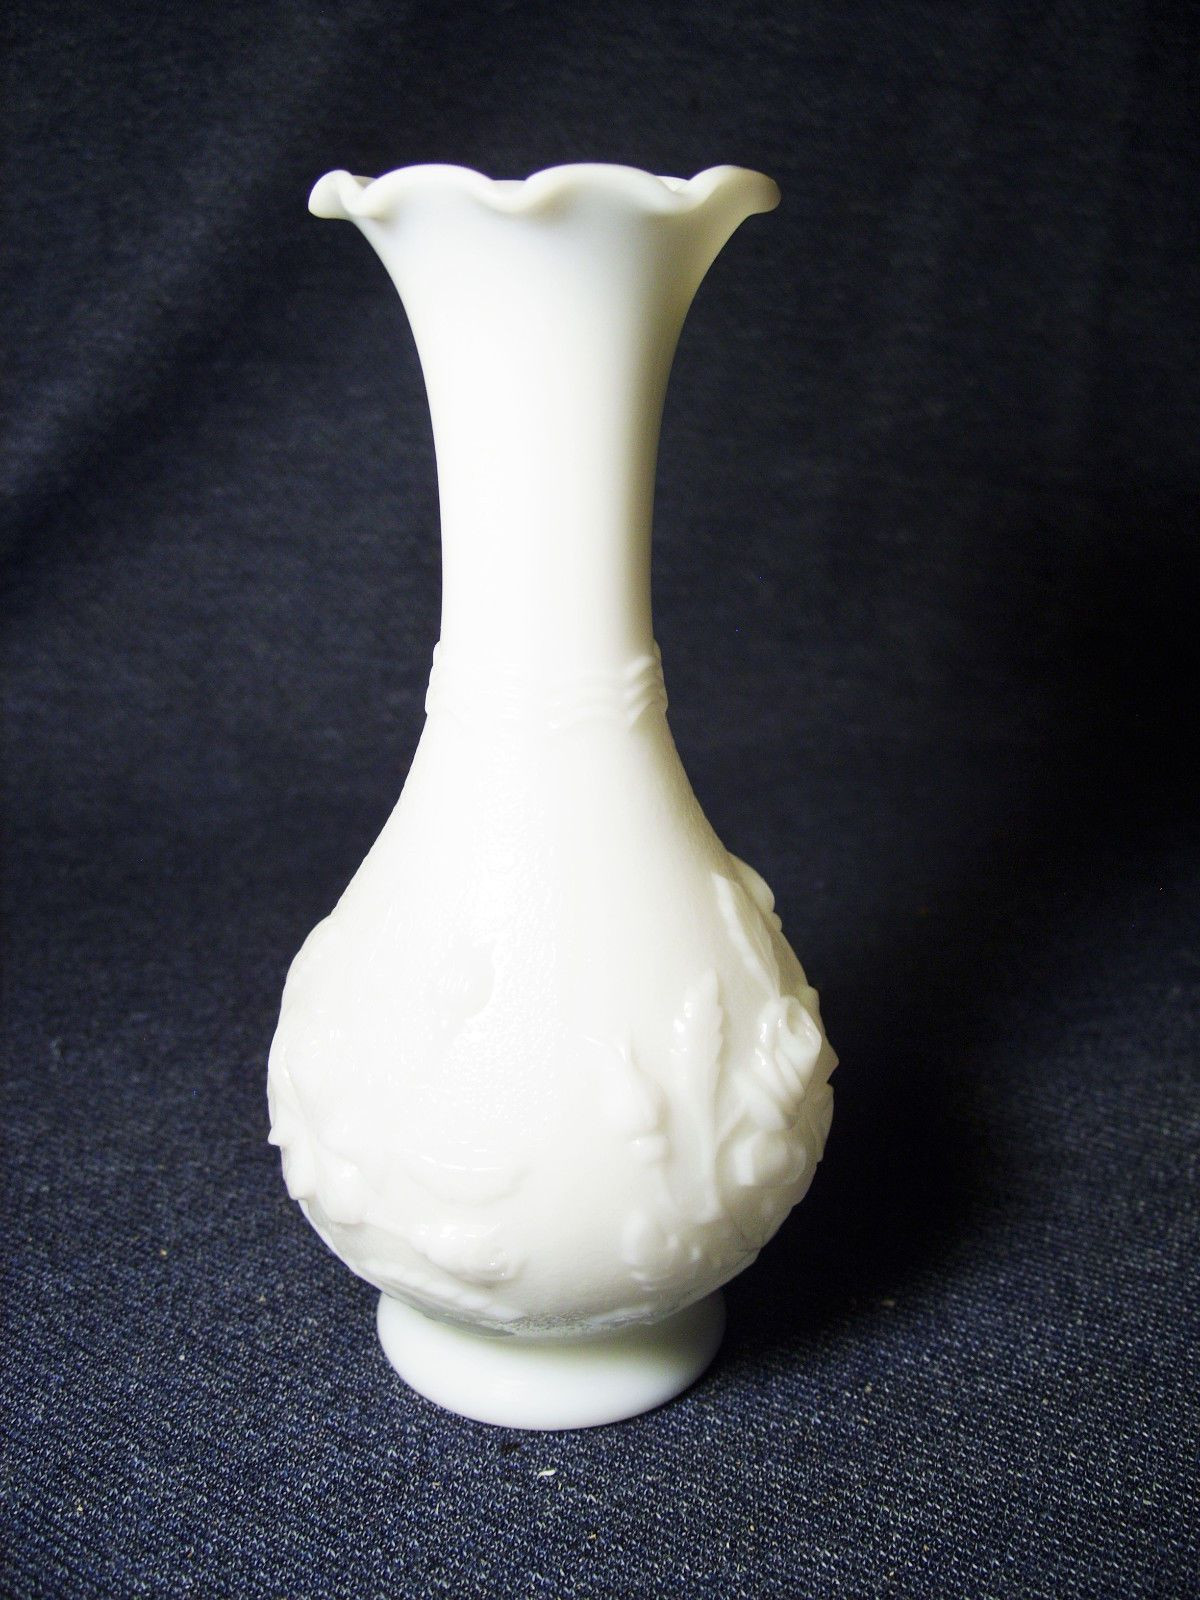 22 Fabulous Tulip Vase Antique 2024 free download tulip vase antique of 26 lenox small vase the weekly world with original vintage imperial glass doeskin white milk glass rose bud